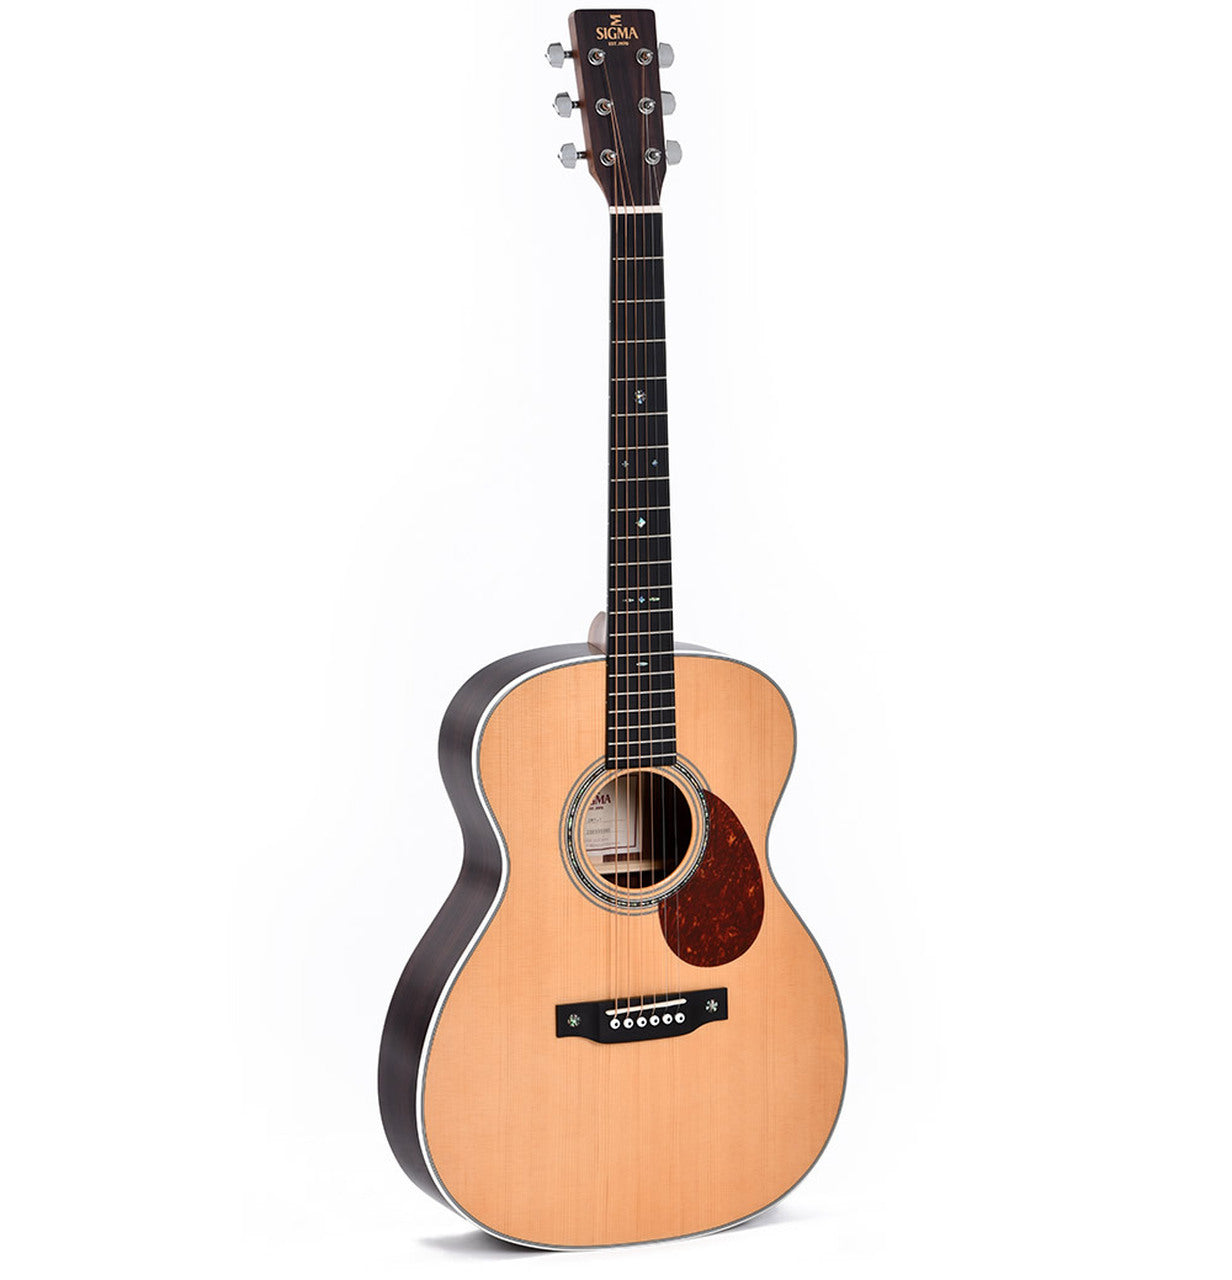 SIGMA OMT-1 ORCHESTRA MODEL ACOUSTIC